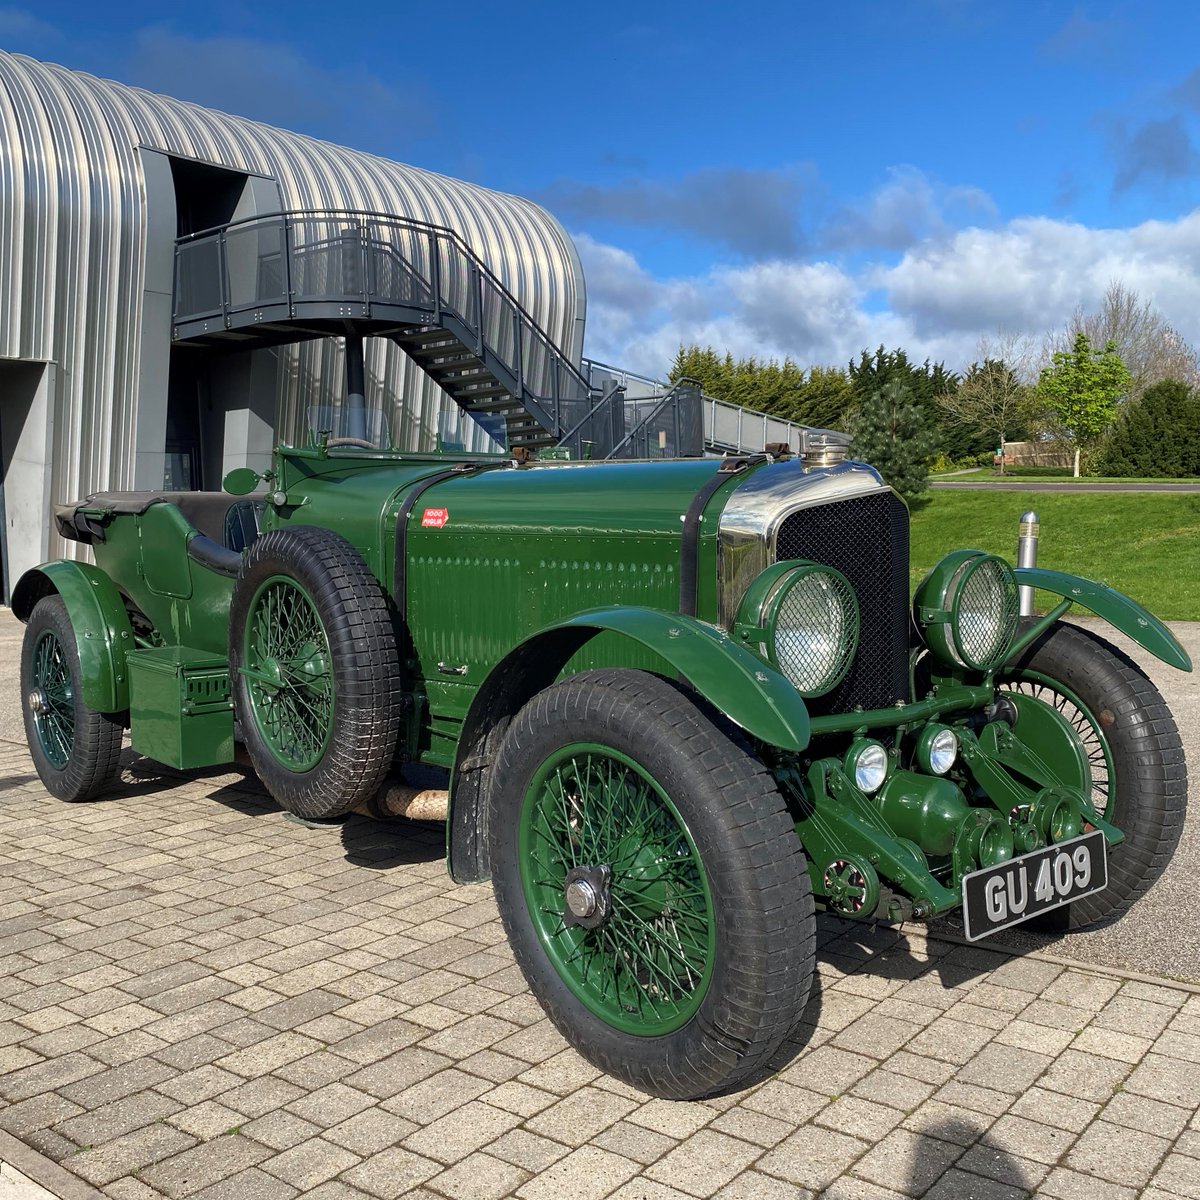 Today is your last chance to see the 3 vintage Bentleys - the EXP2, the Blower and the Speed Six, all kindly loaned from @BentleyMotors. What will be coming to the Museum next? 👀 You'll find out soon... #Bentley #BentleyBlower #BentleyEXP2 #BentleySpeedSix #LastChance